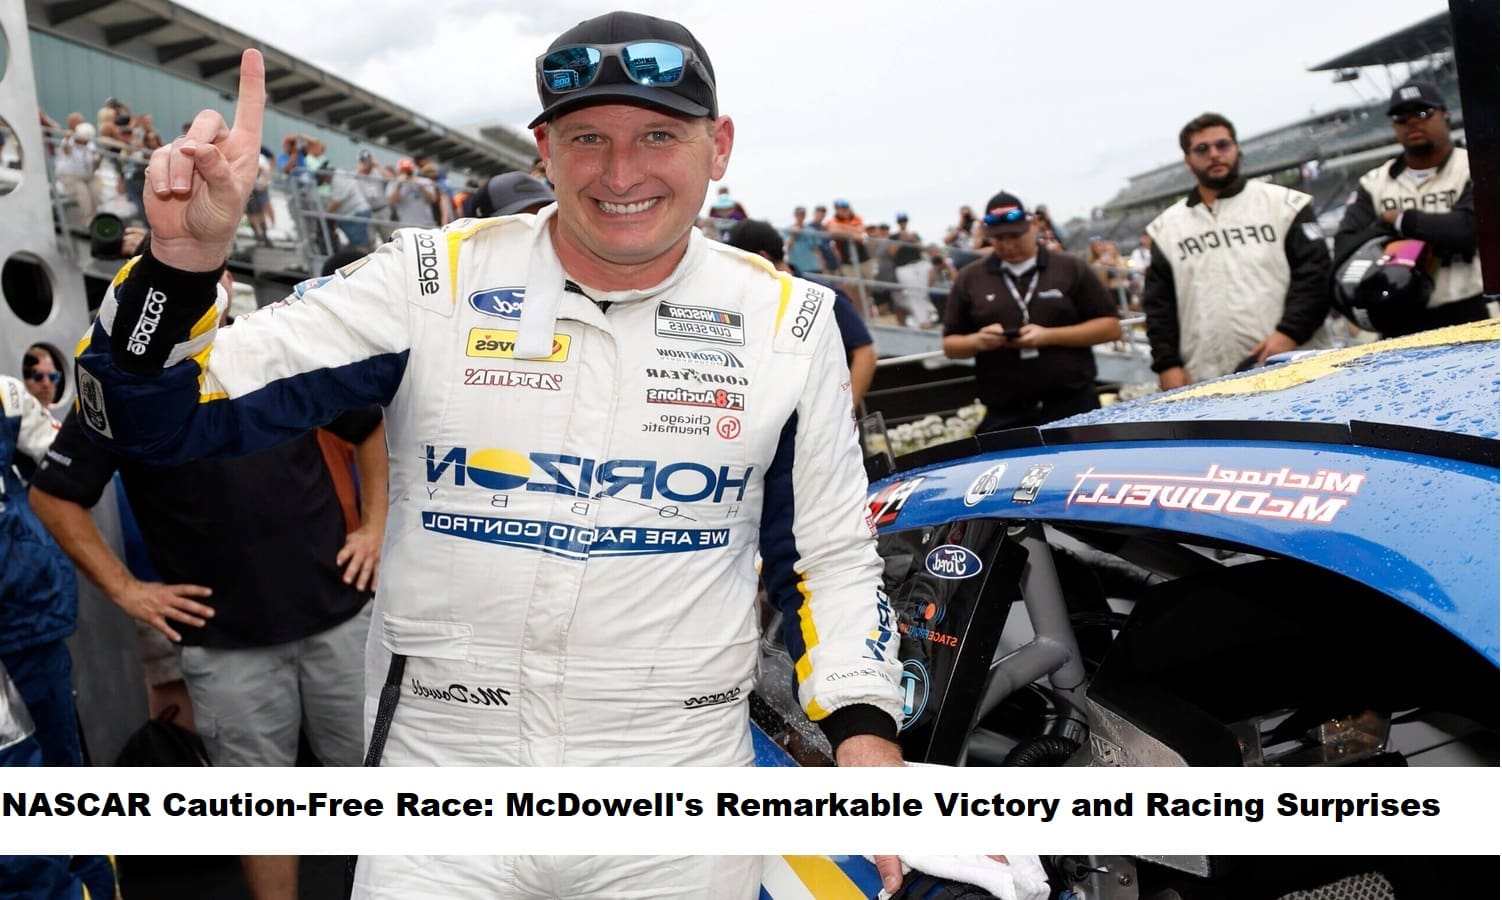 nascar-caution-free-race-mcdowells-remarkable-victory-and-racing-surprises